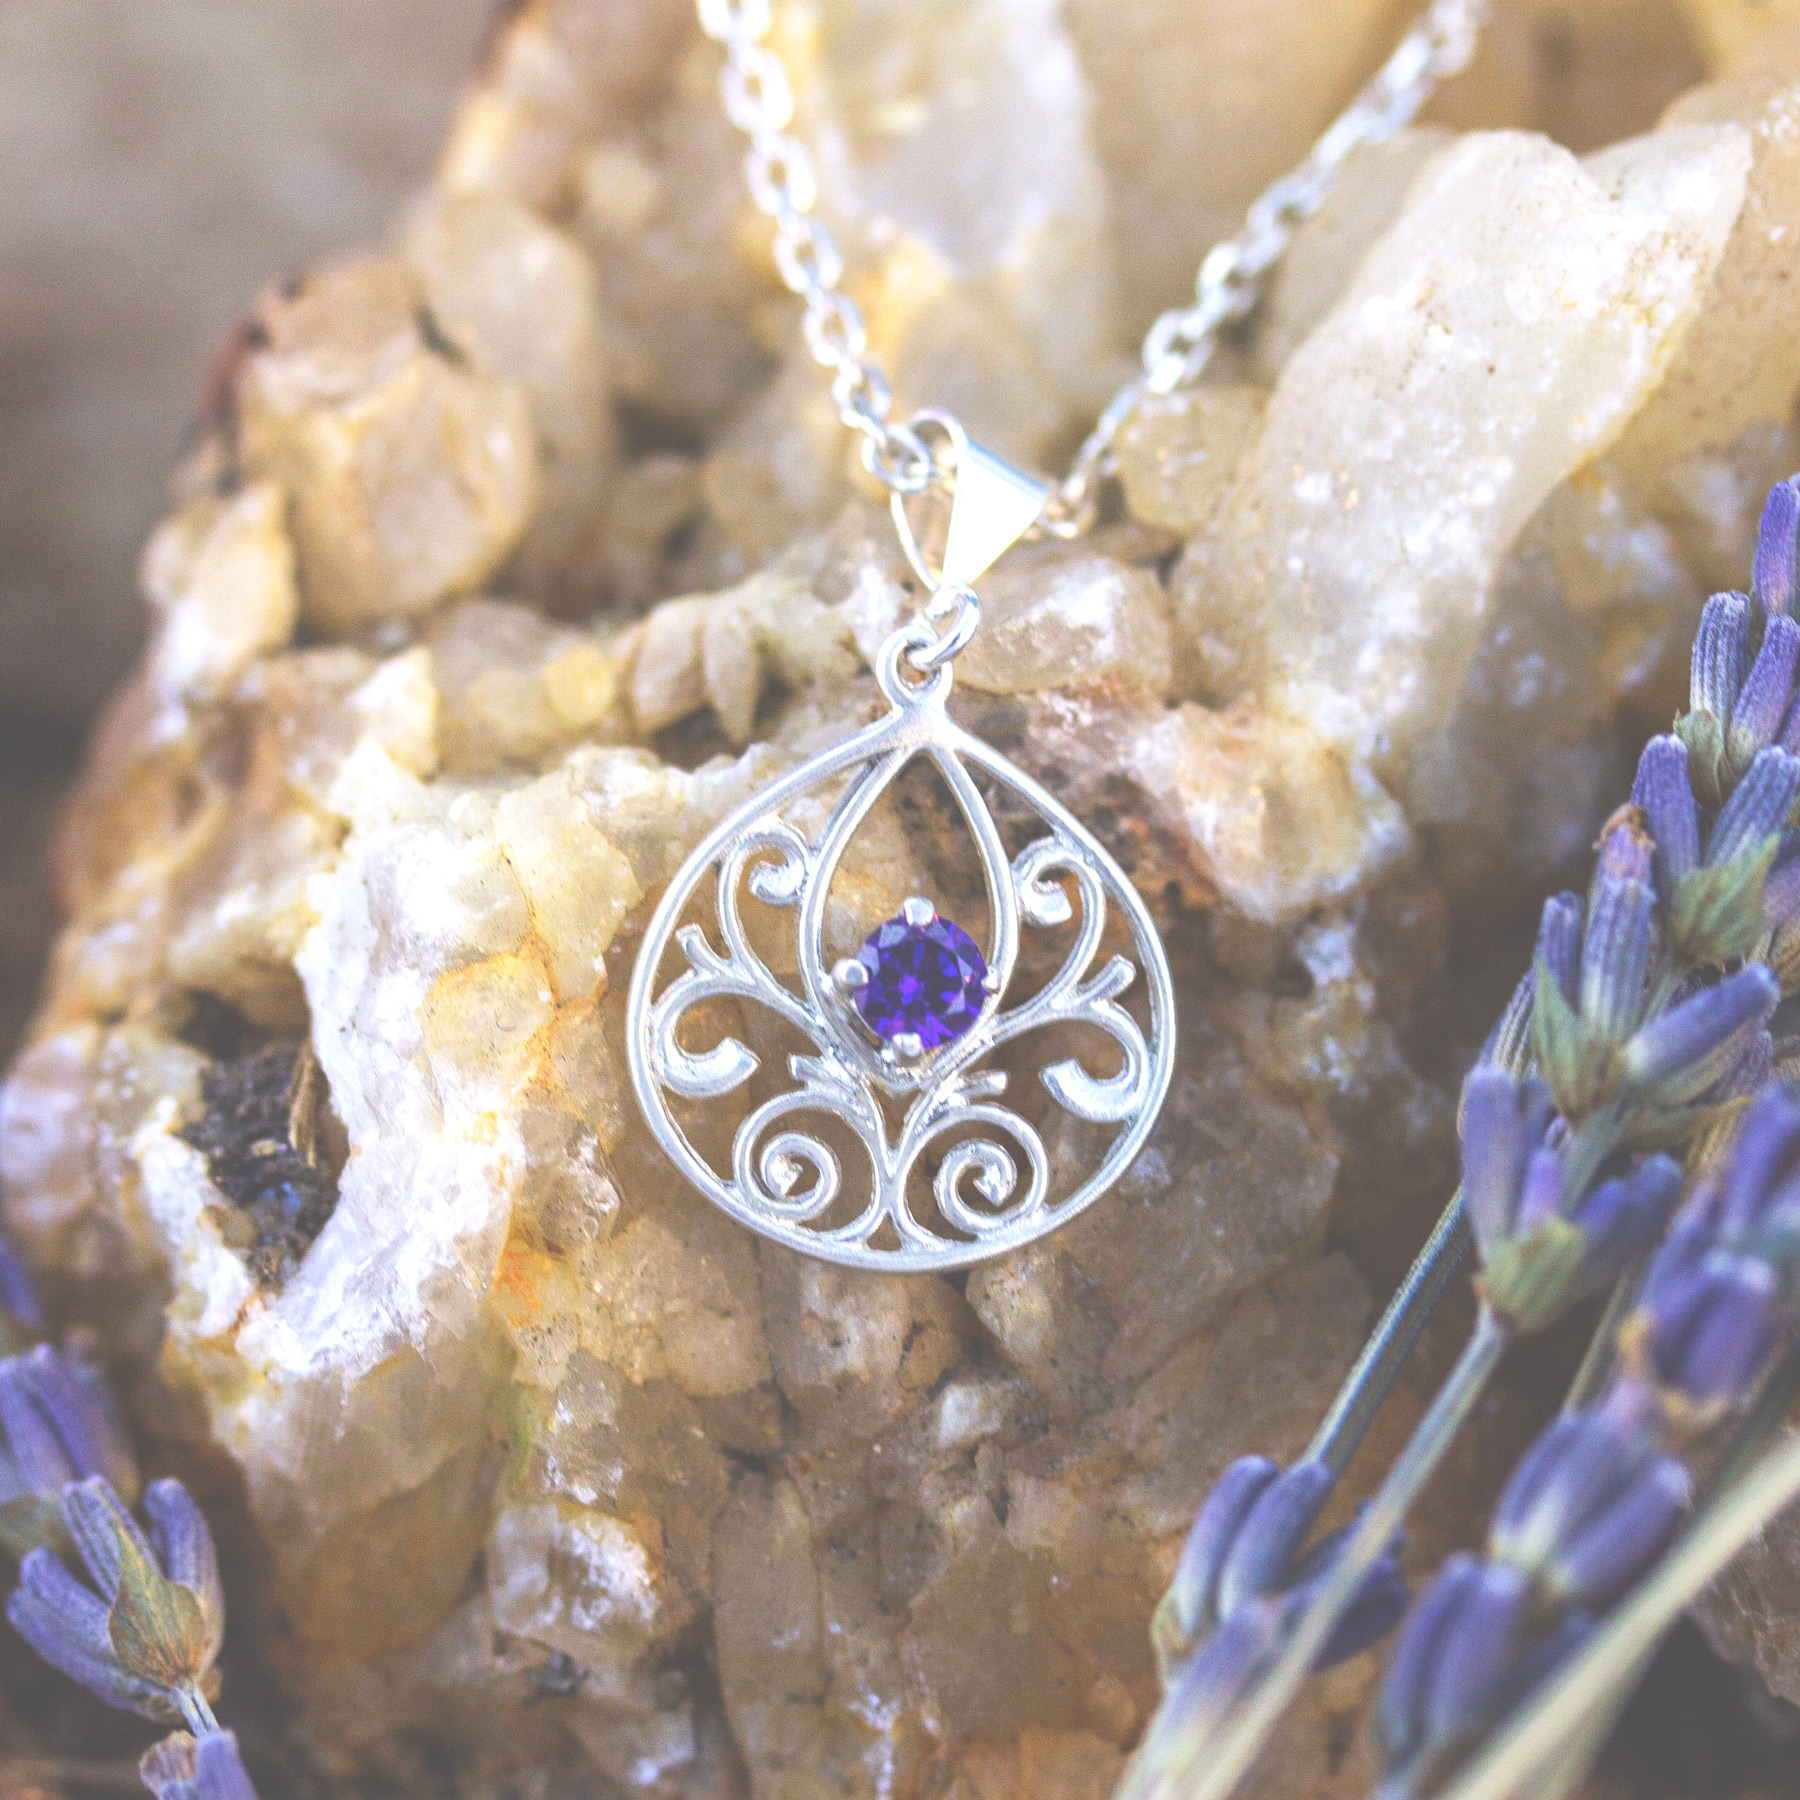 Filigree necklace charm with added amethyst CZ stone